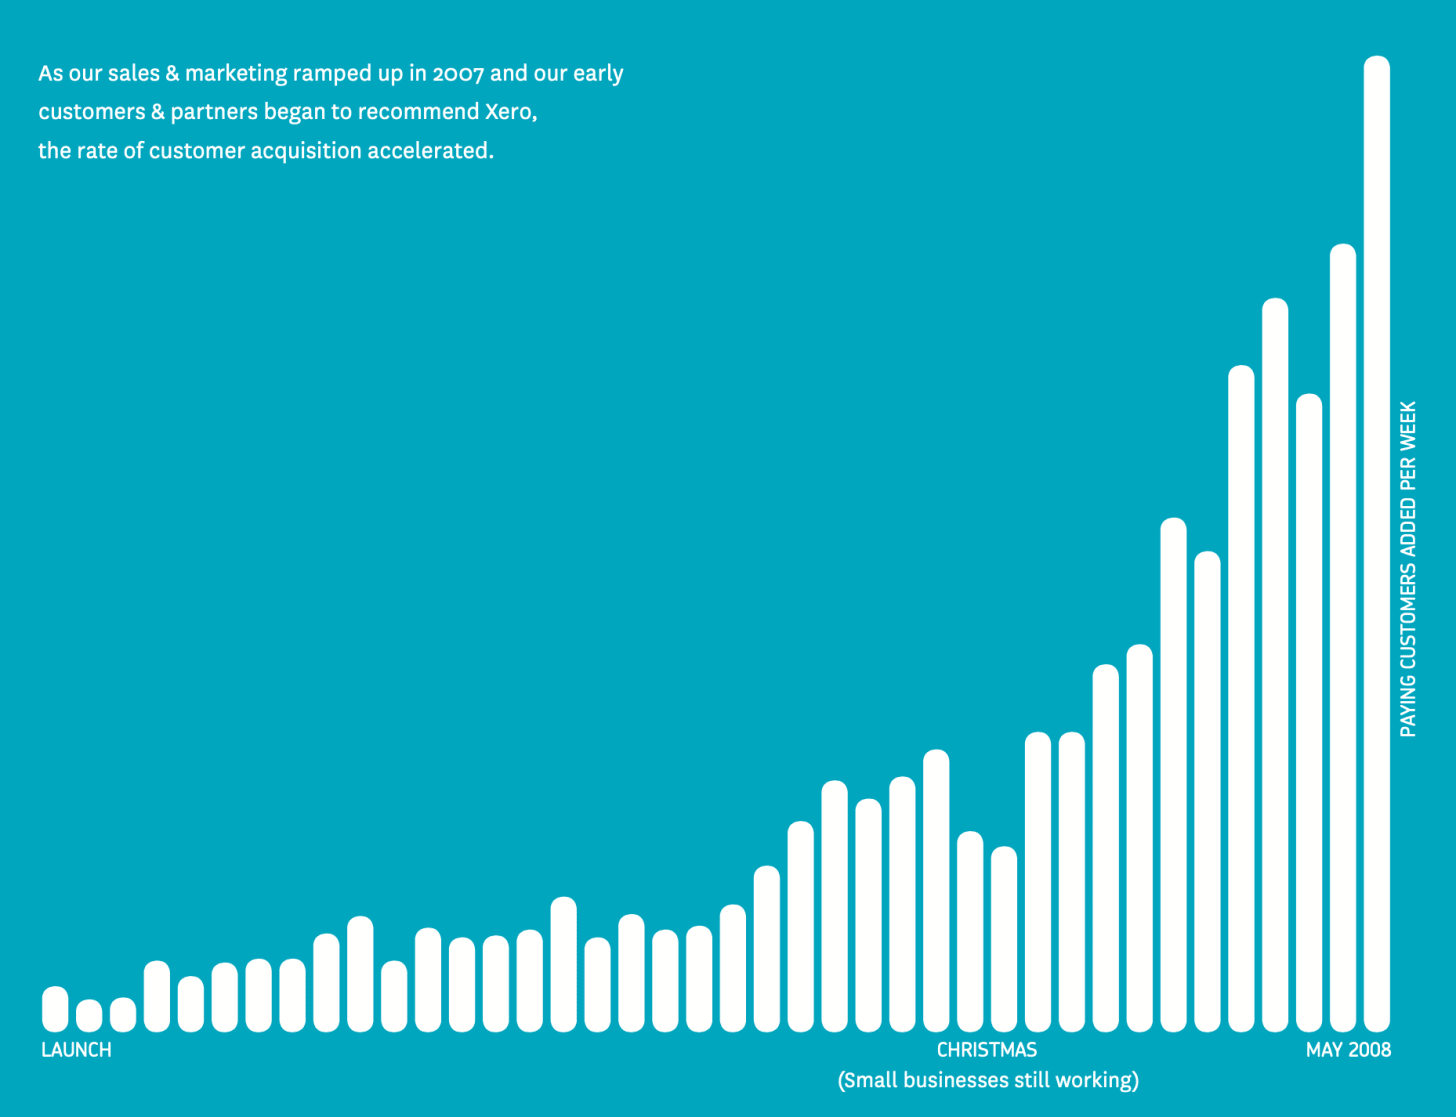 Graph from Xero Annual Report, May 2008